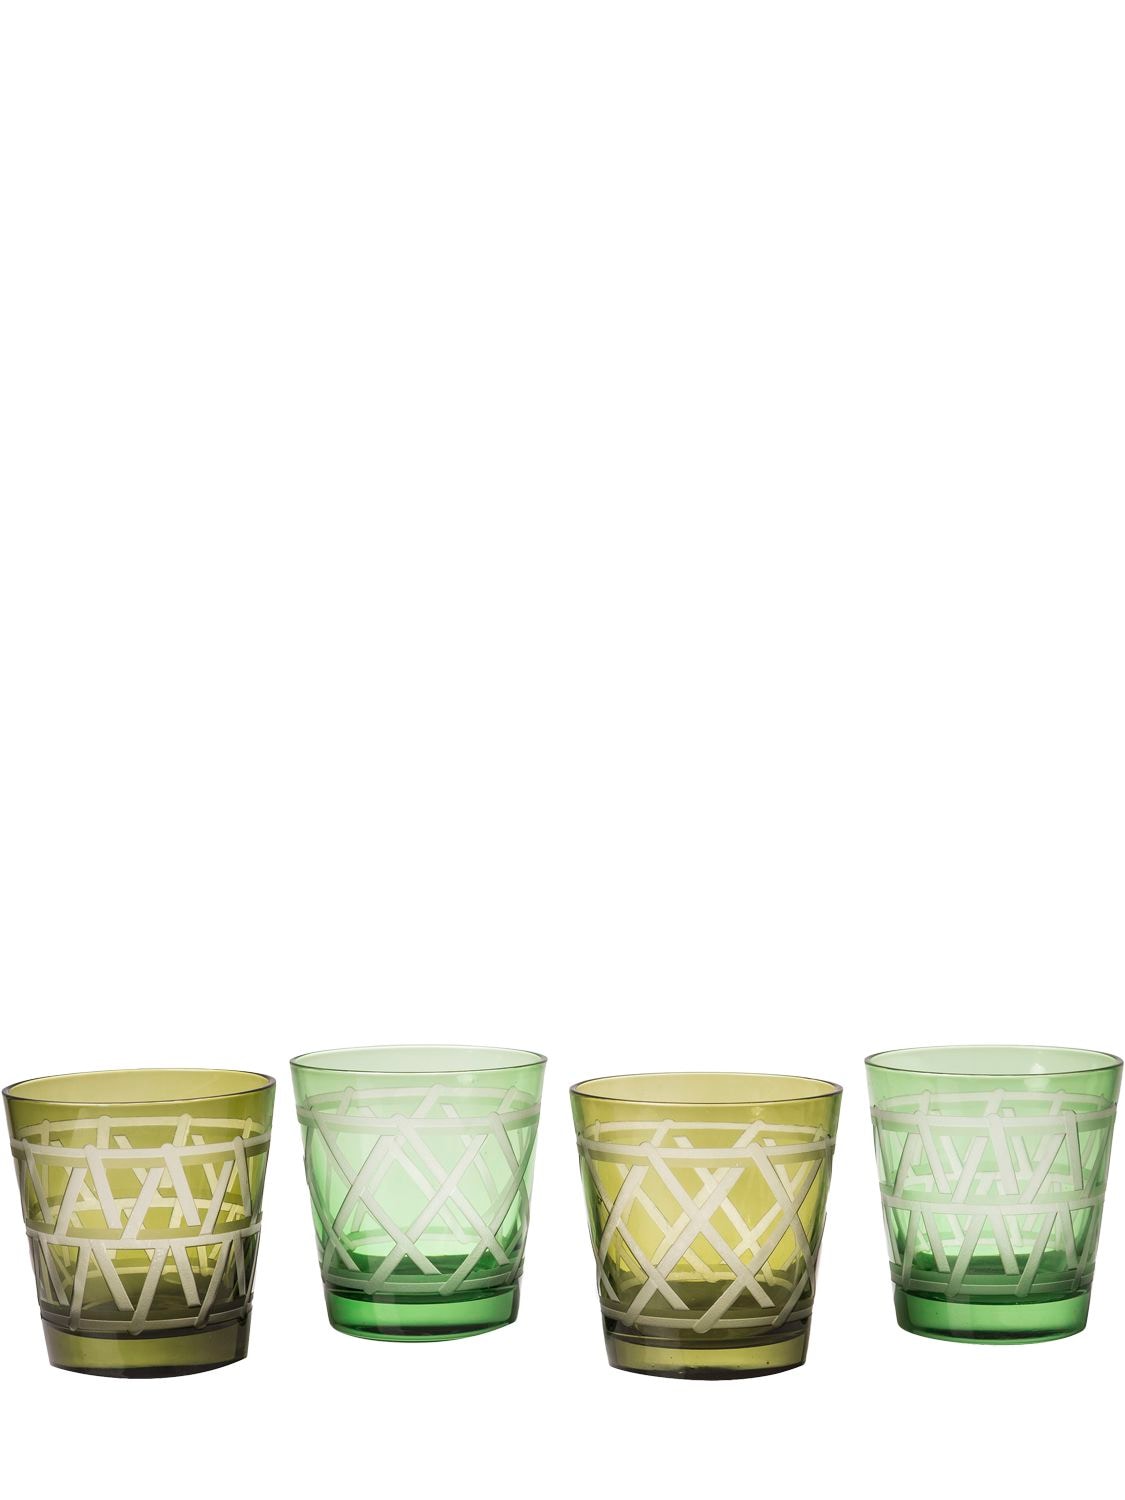 Image of Tie Up Set Of 4 Glass Tumblers